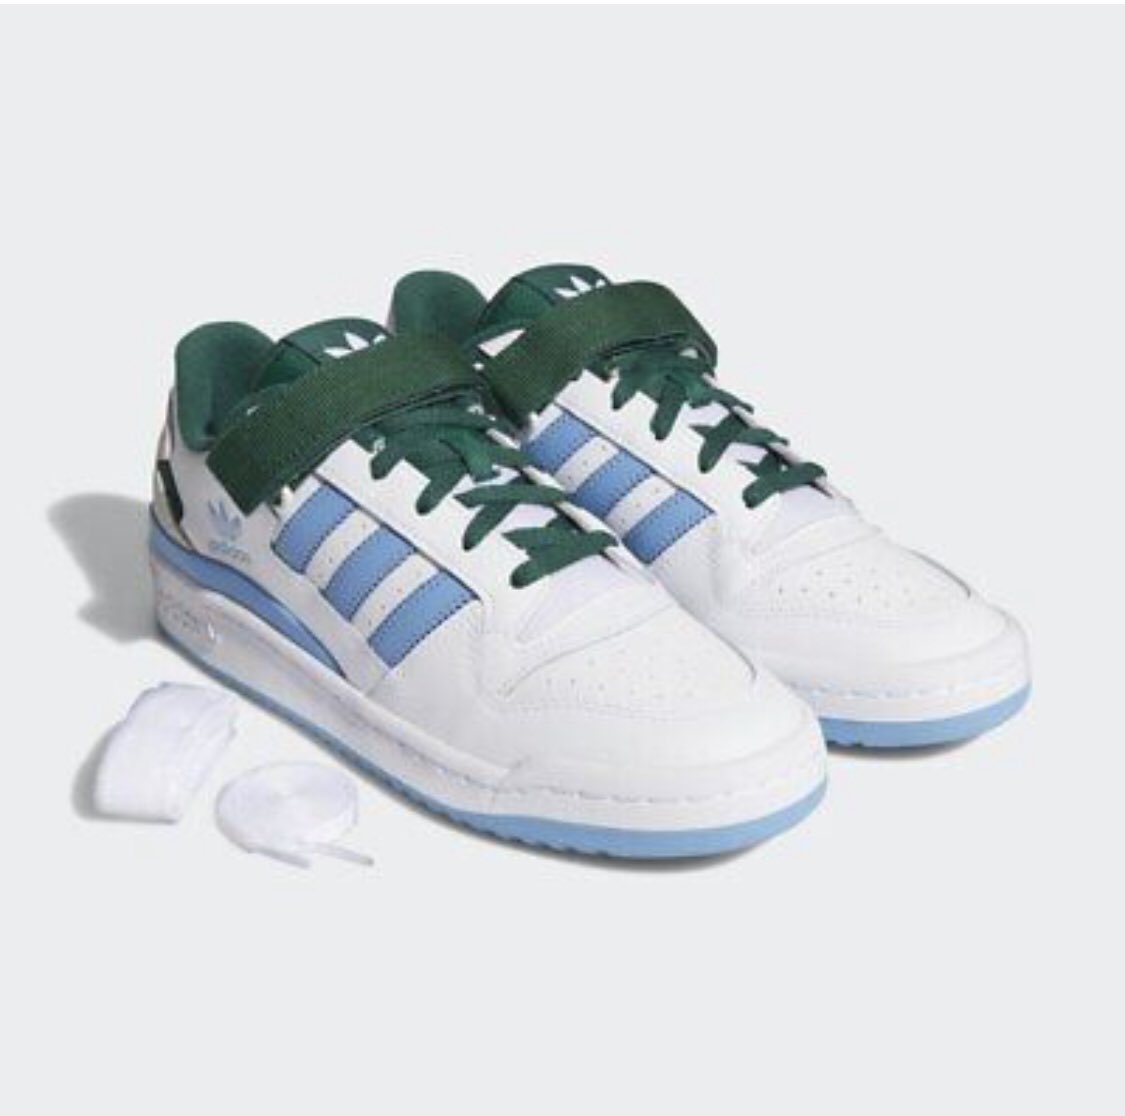 STREETWAIR CO. on Twitter: "$47 Adidas Men's Forum Low Crest Shoes, Use Coupon Code "ADIDAS25MDW" https://t.co/AqyotjmHyo #Adidas #Sneakers https://t.co/Fdx7U9tNKY"